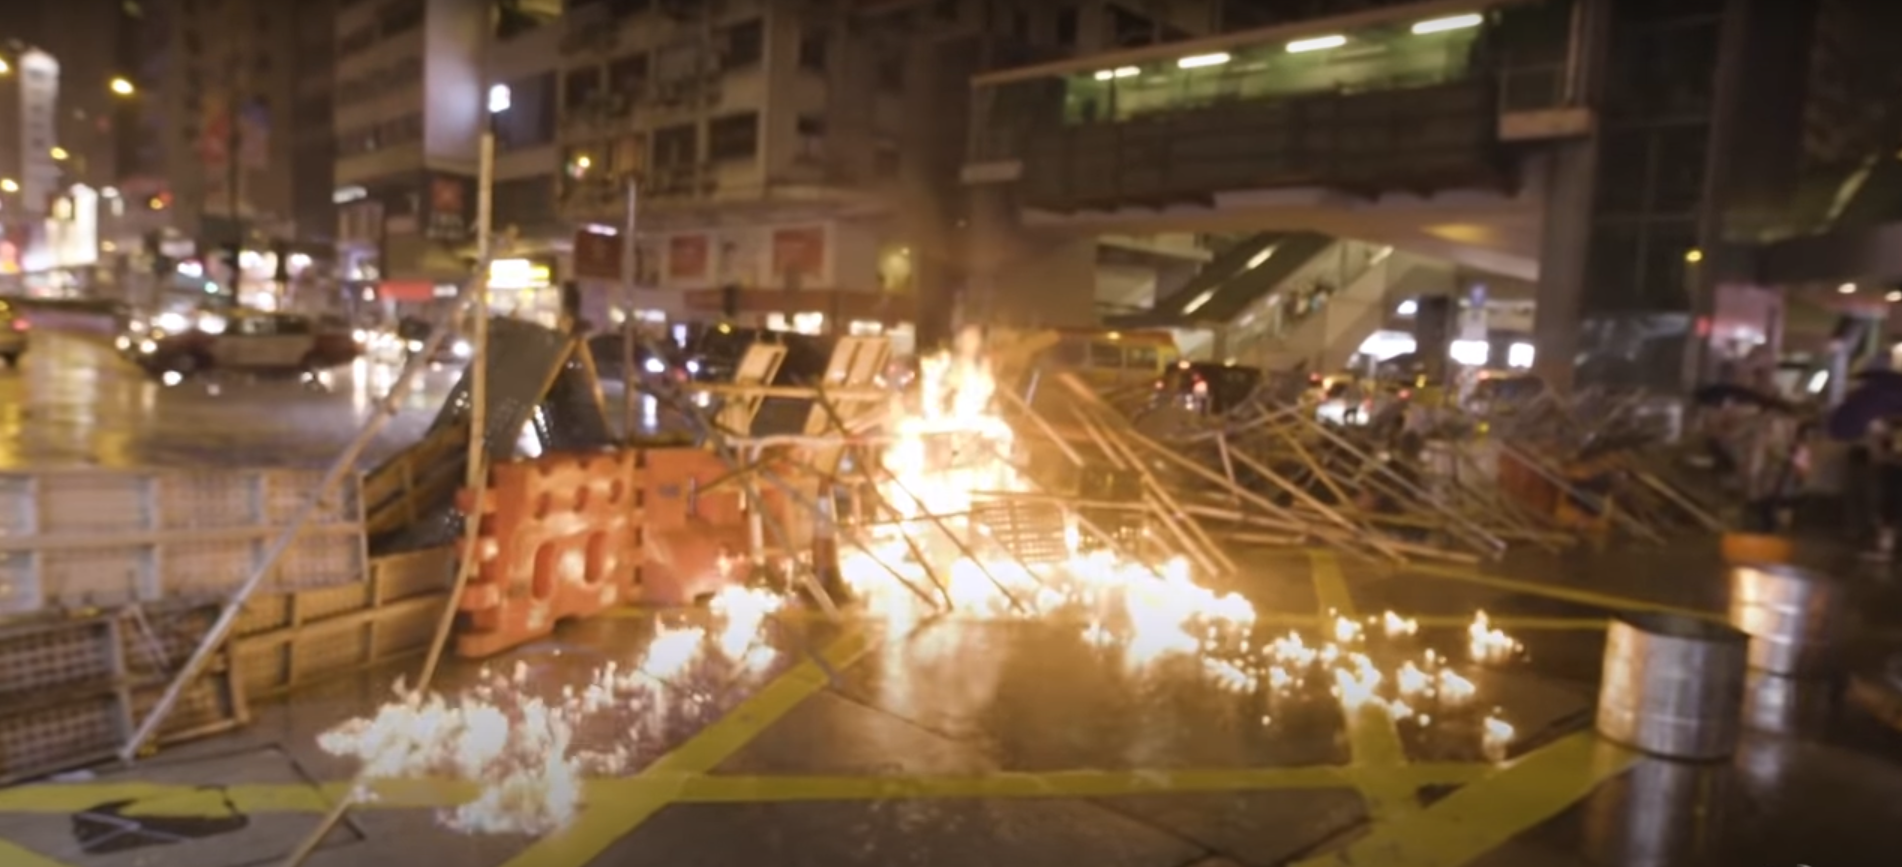 Hong Kong protestors created barriers and lit fires in October 2019 during the protests. [YouTube/Screenshot/TheNewYorkTimes]